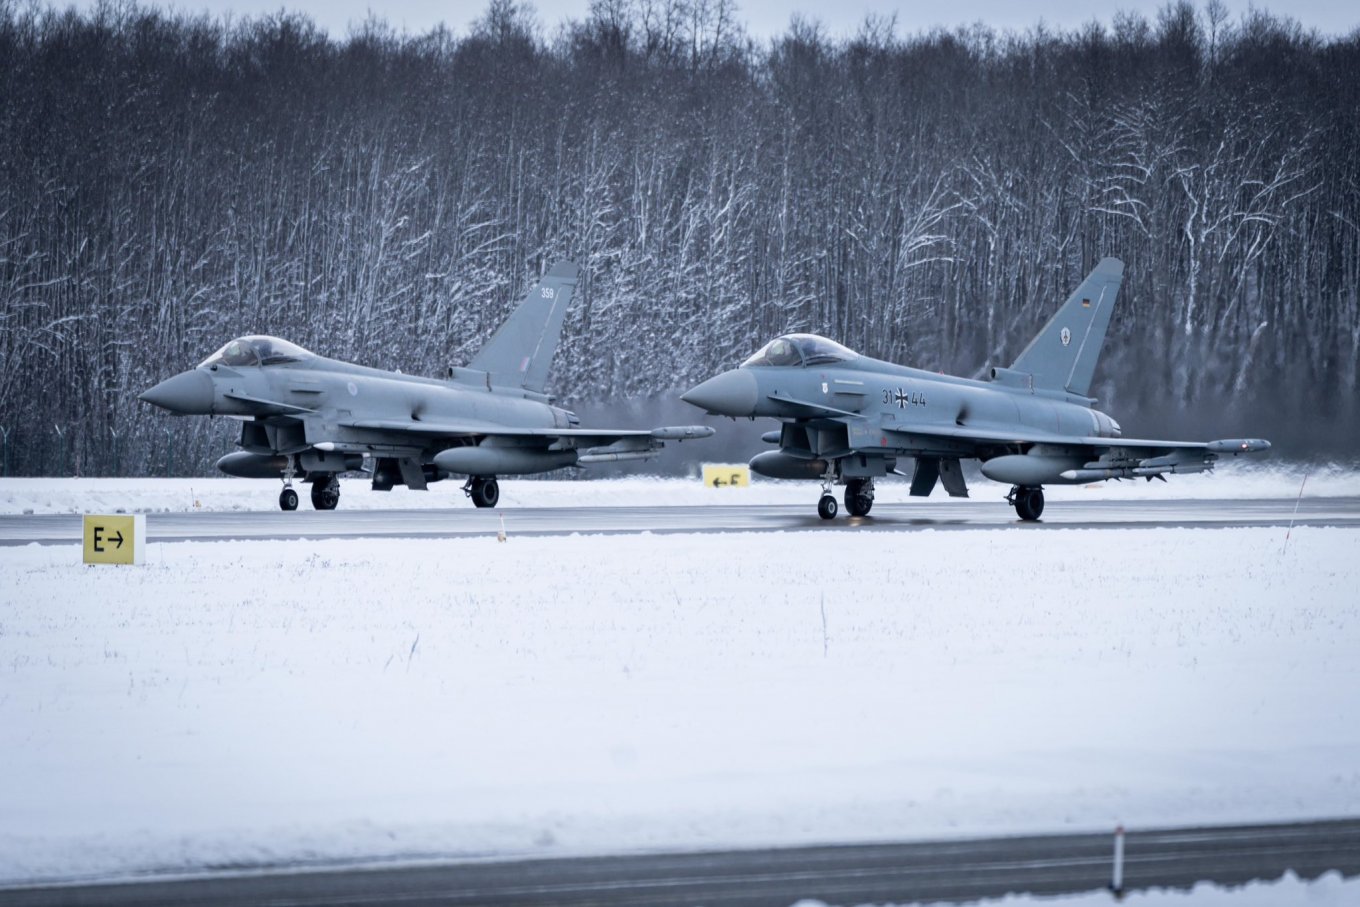 The Eurofighter aircraft of the Royal Air Force and the German Air Force on March 14, 2023 Defense Express Does russia Use Civil and Transport Aircraft to Violate the Airspace Because it Rans Out of Combat Aircraft